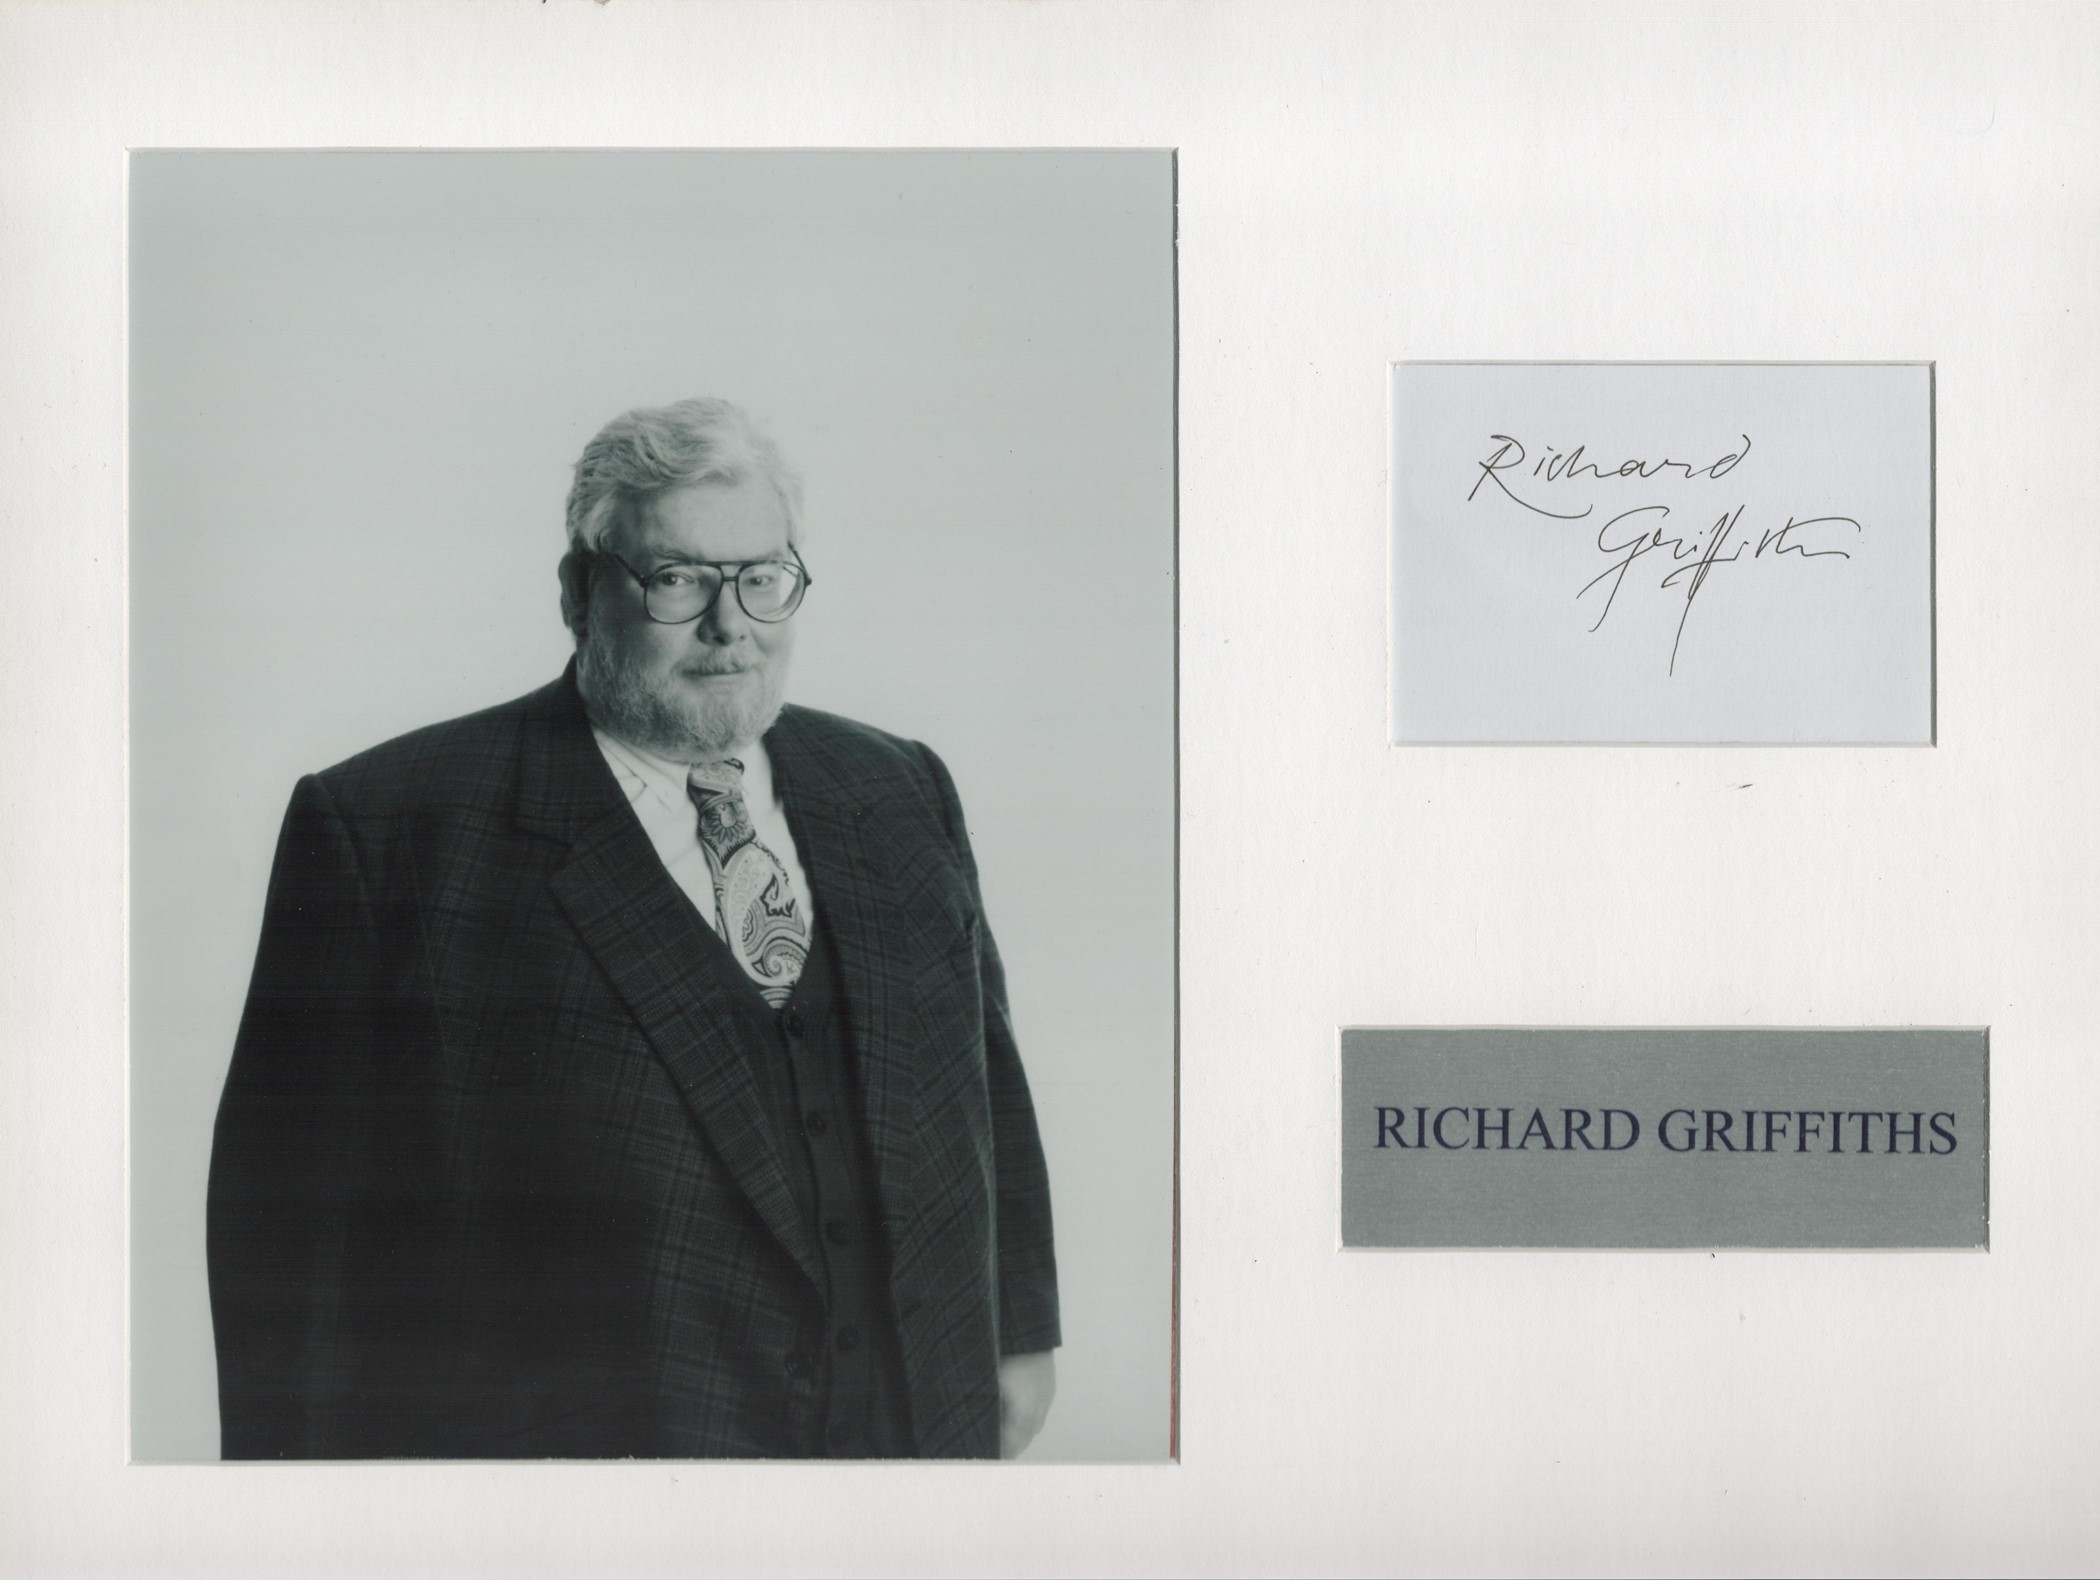 Richard Griffiths 16x12 inch mounted signature piece includes signed album page and black and